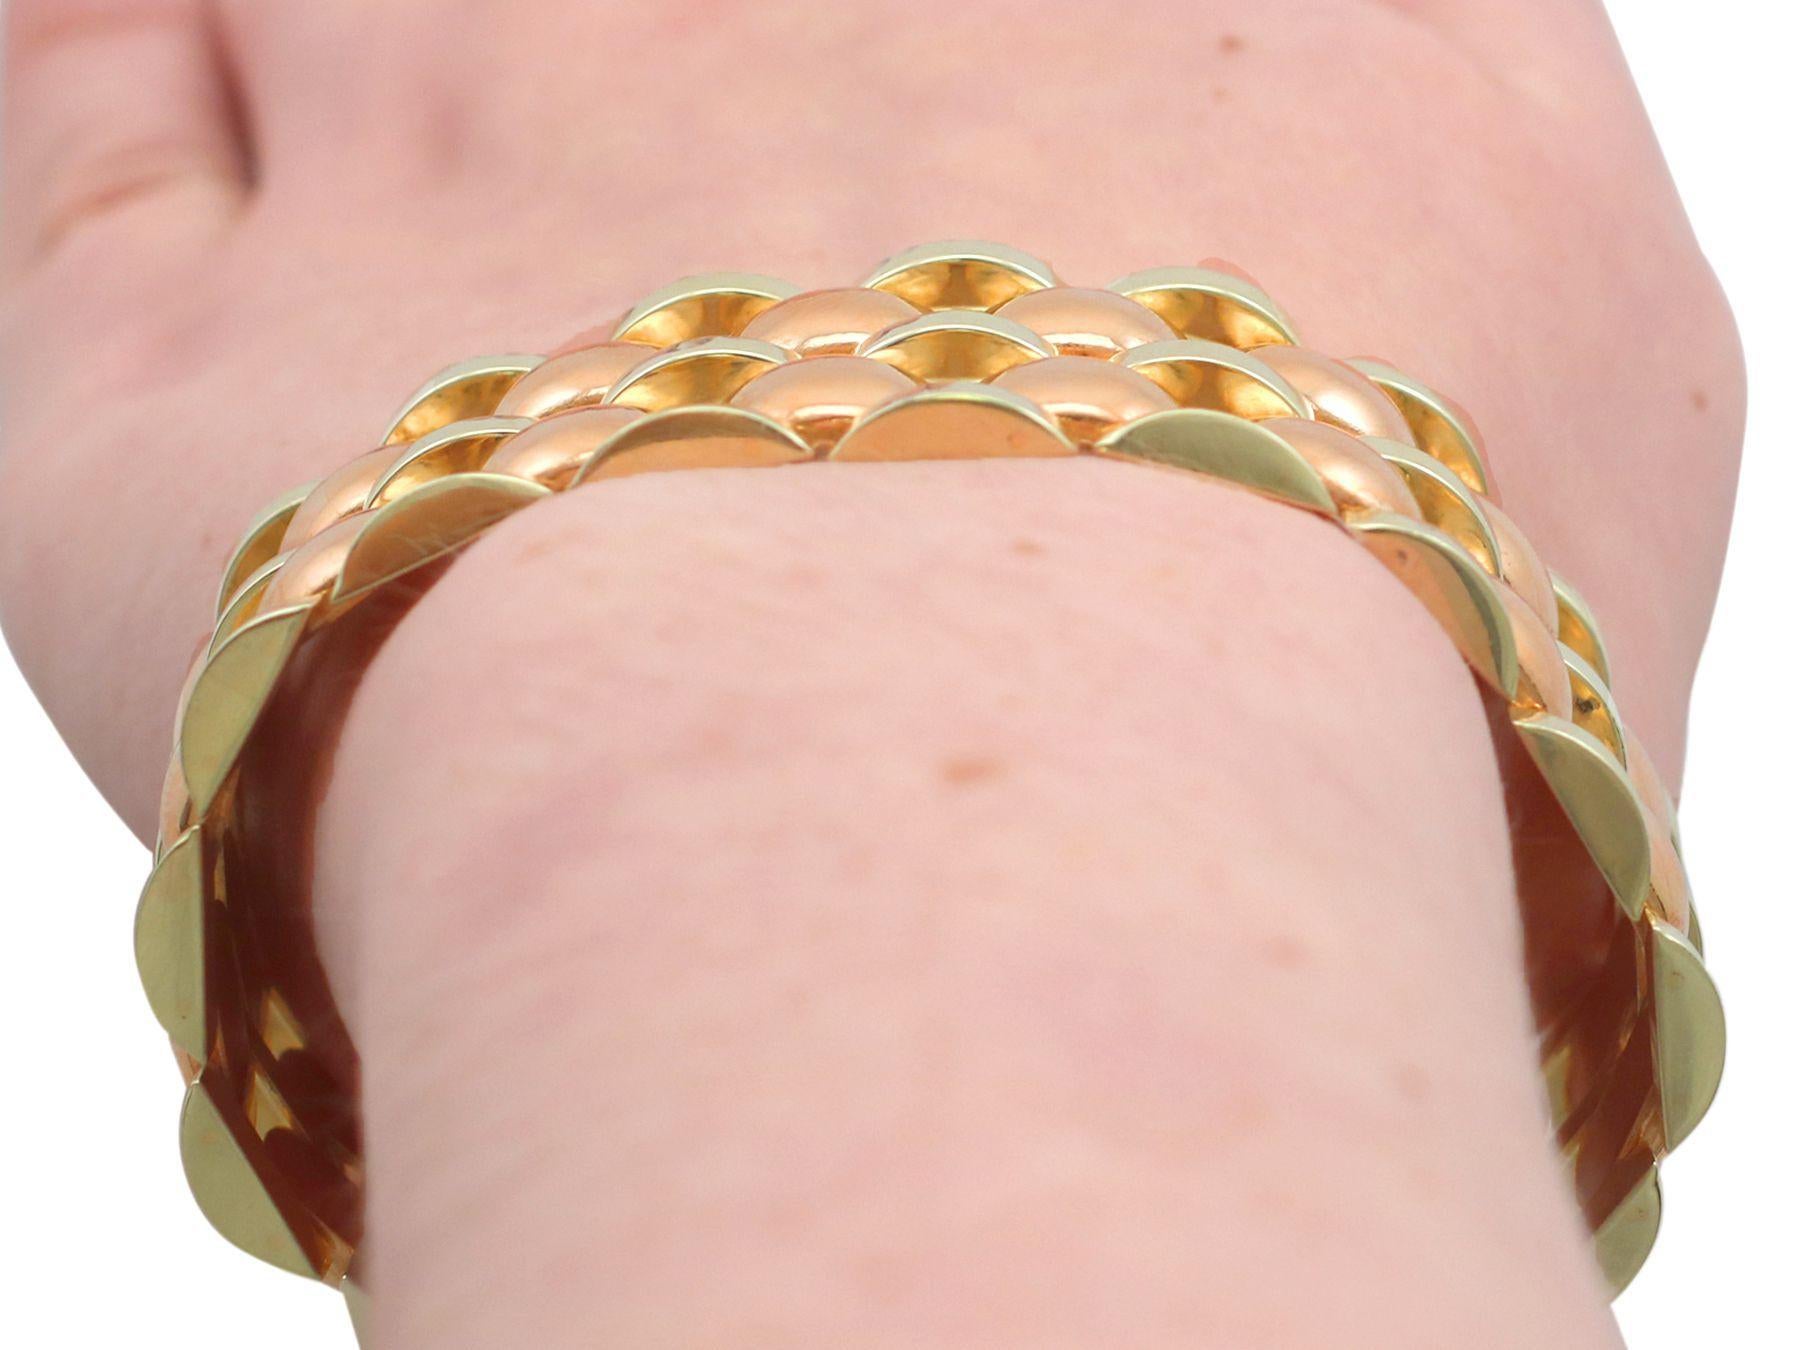 1950s Vintage Art Deco Style Rose Gold and Yellow Gold Bracelet For Sale 2